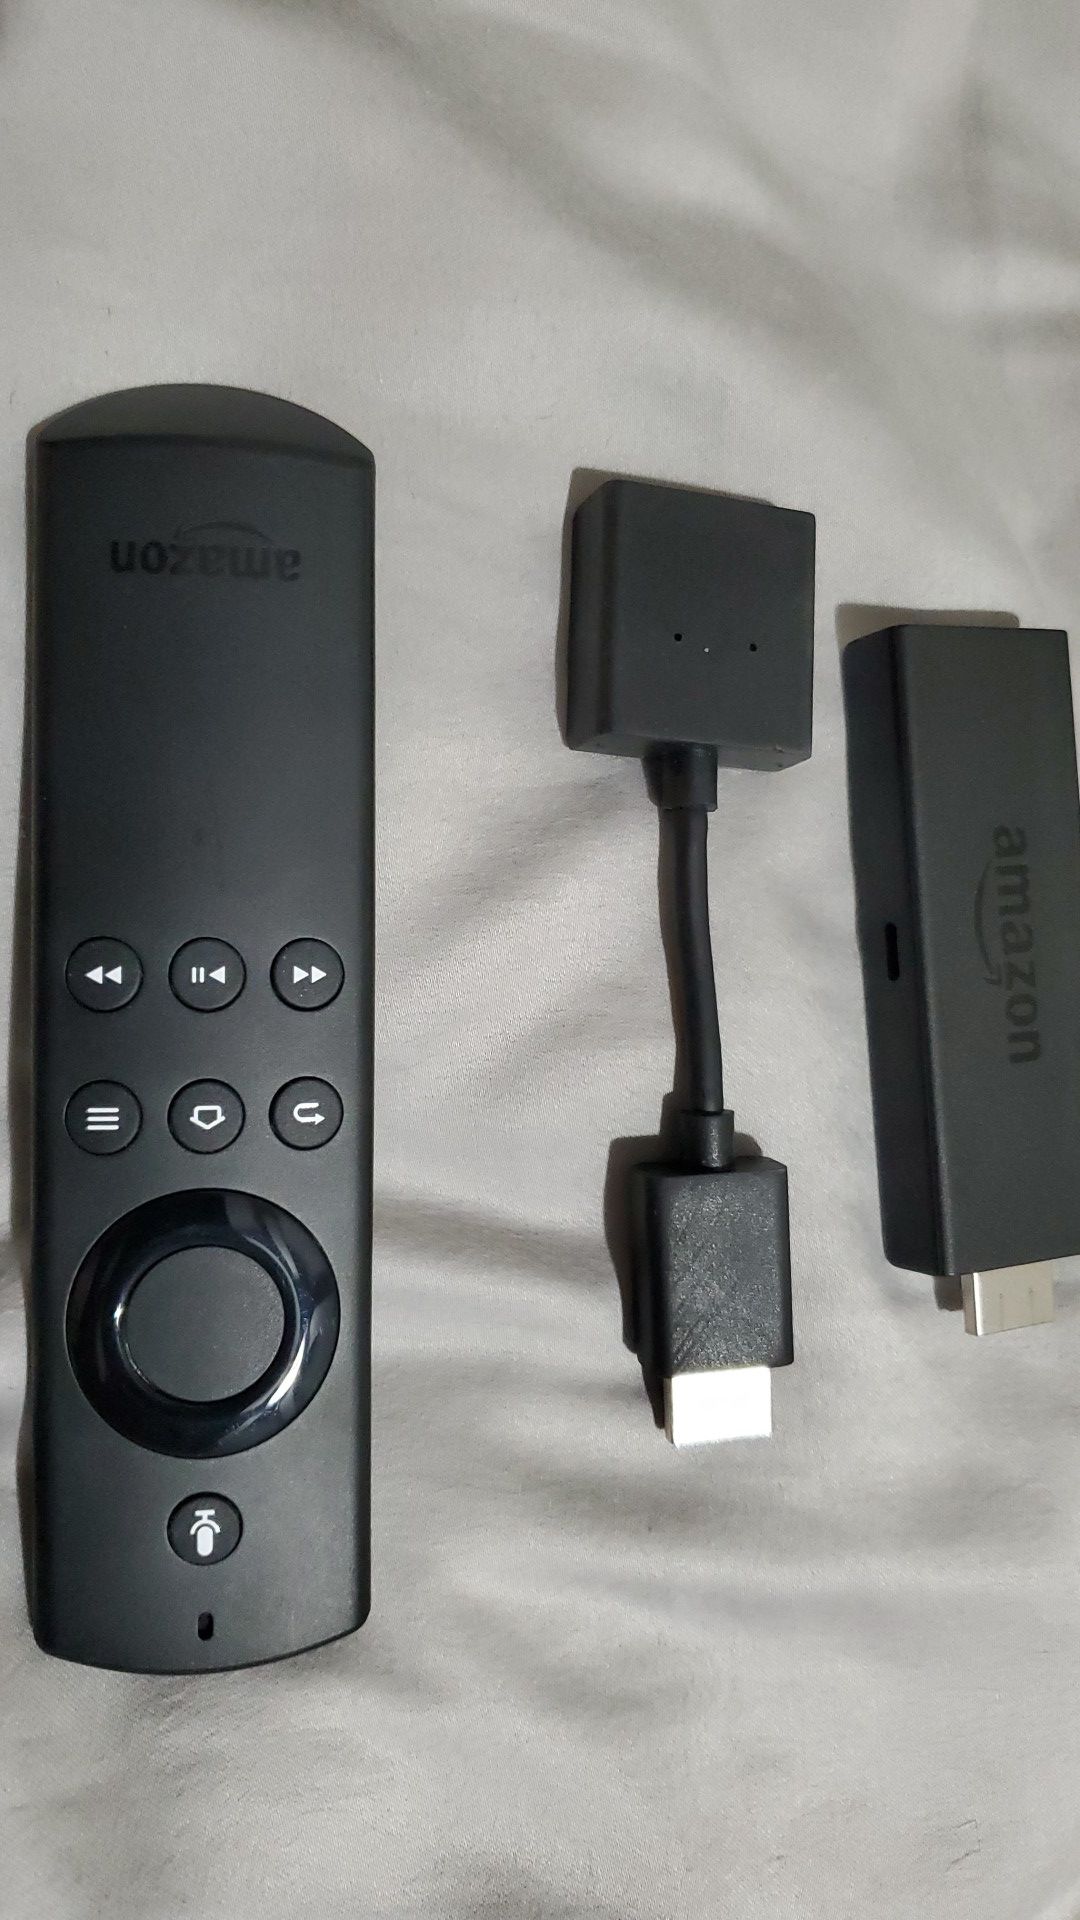 Amazon fire stick with voice remote